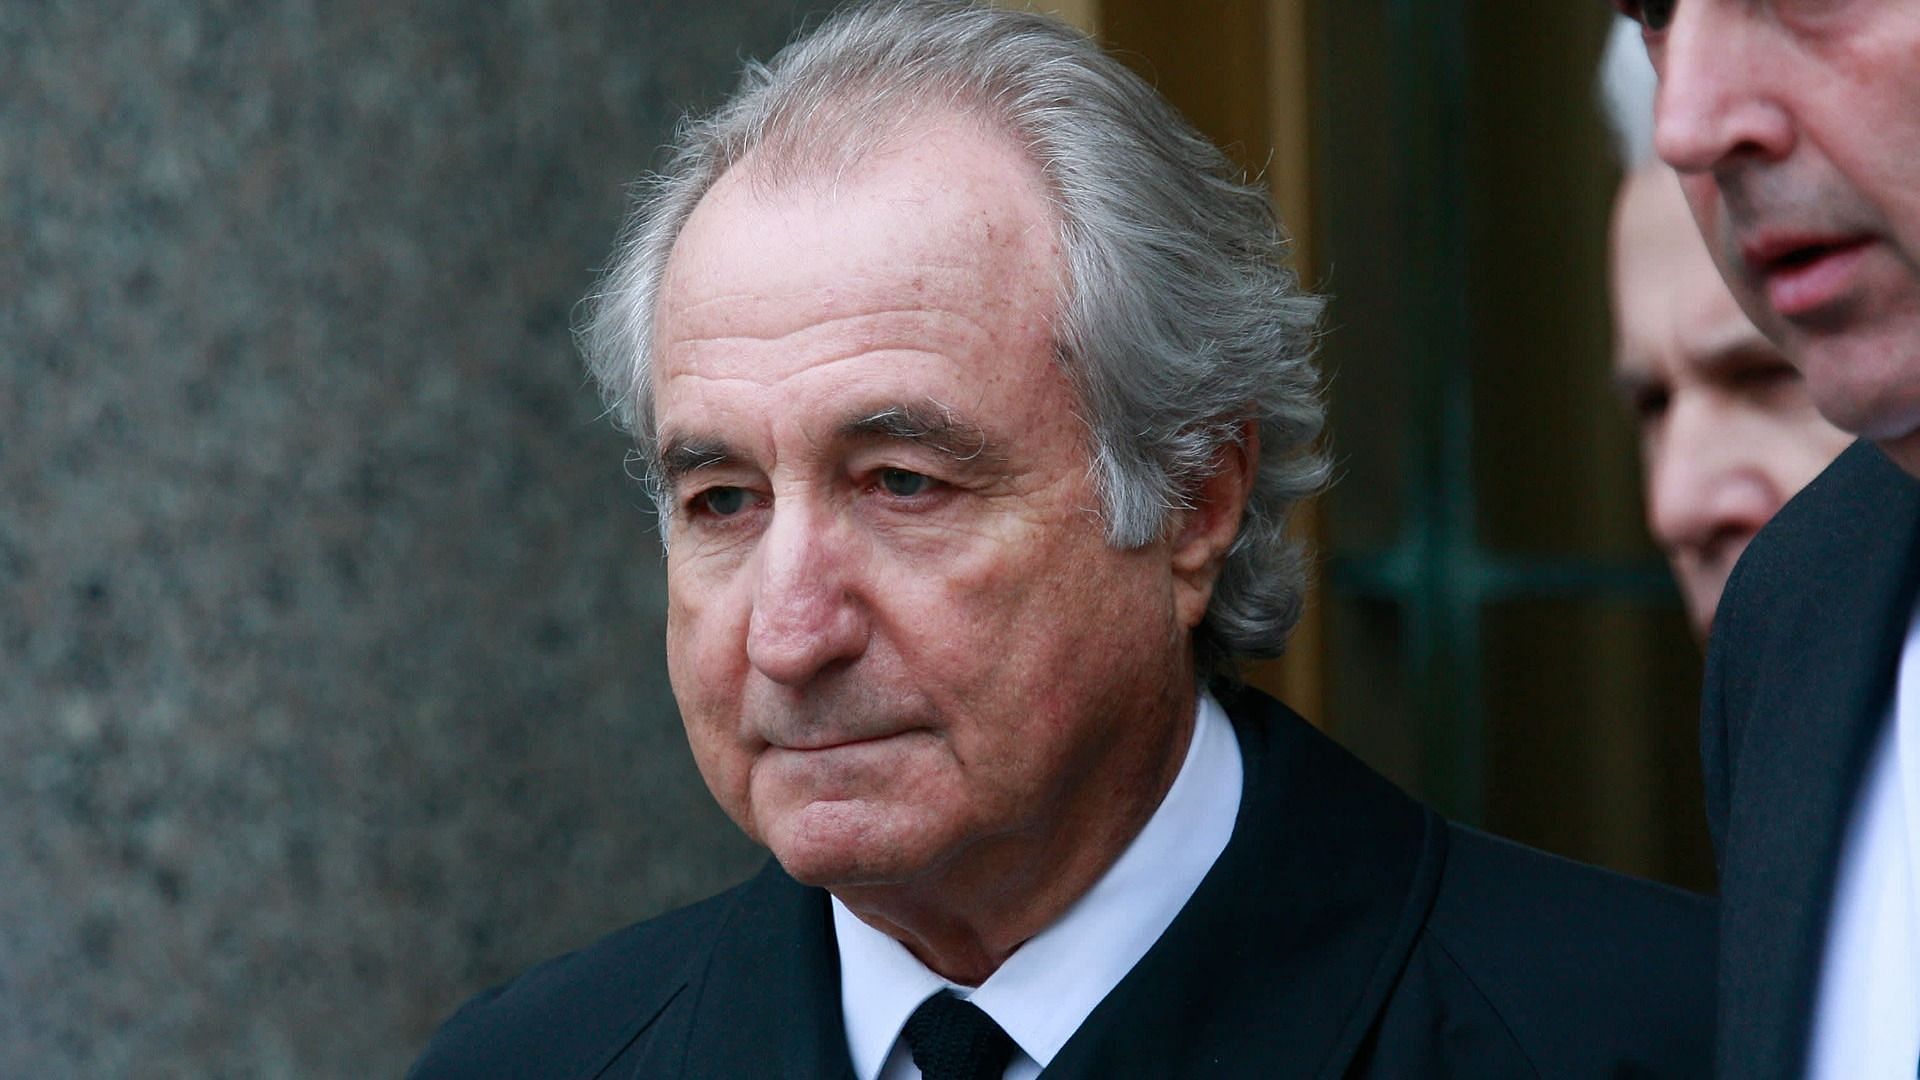 Bernie Madoff&#039;s sister and brother-in-law were found dead in Florida (Image via Mario Tama/Getty Images)